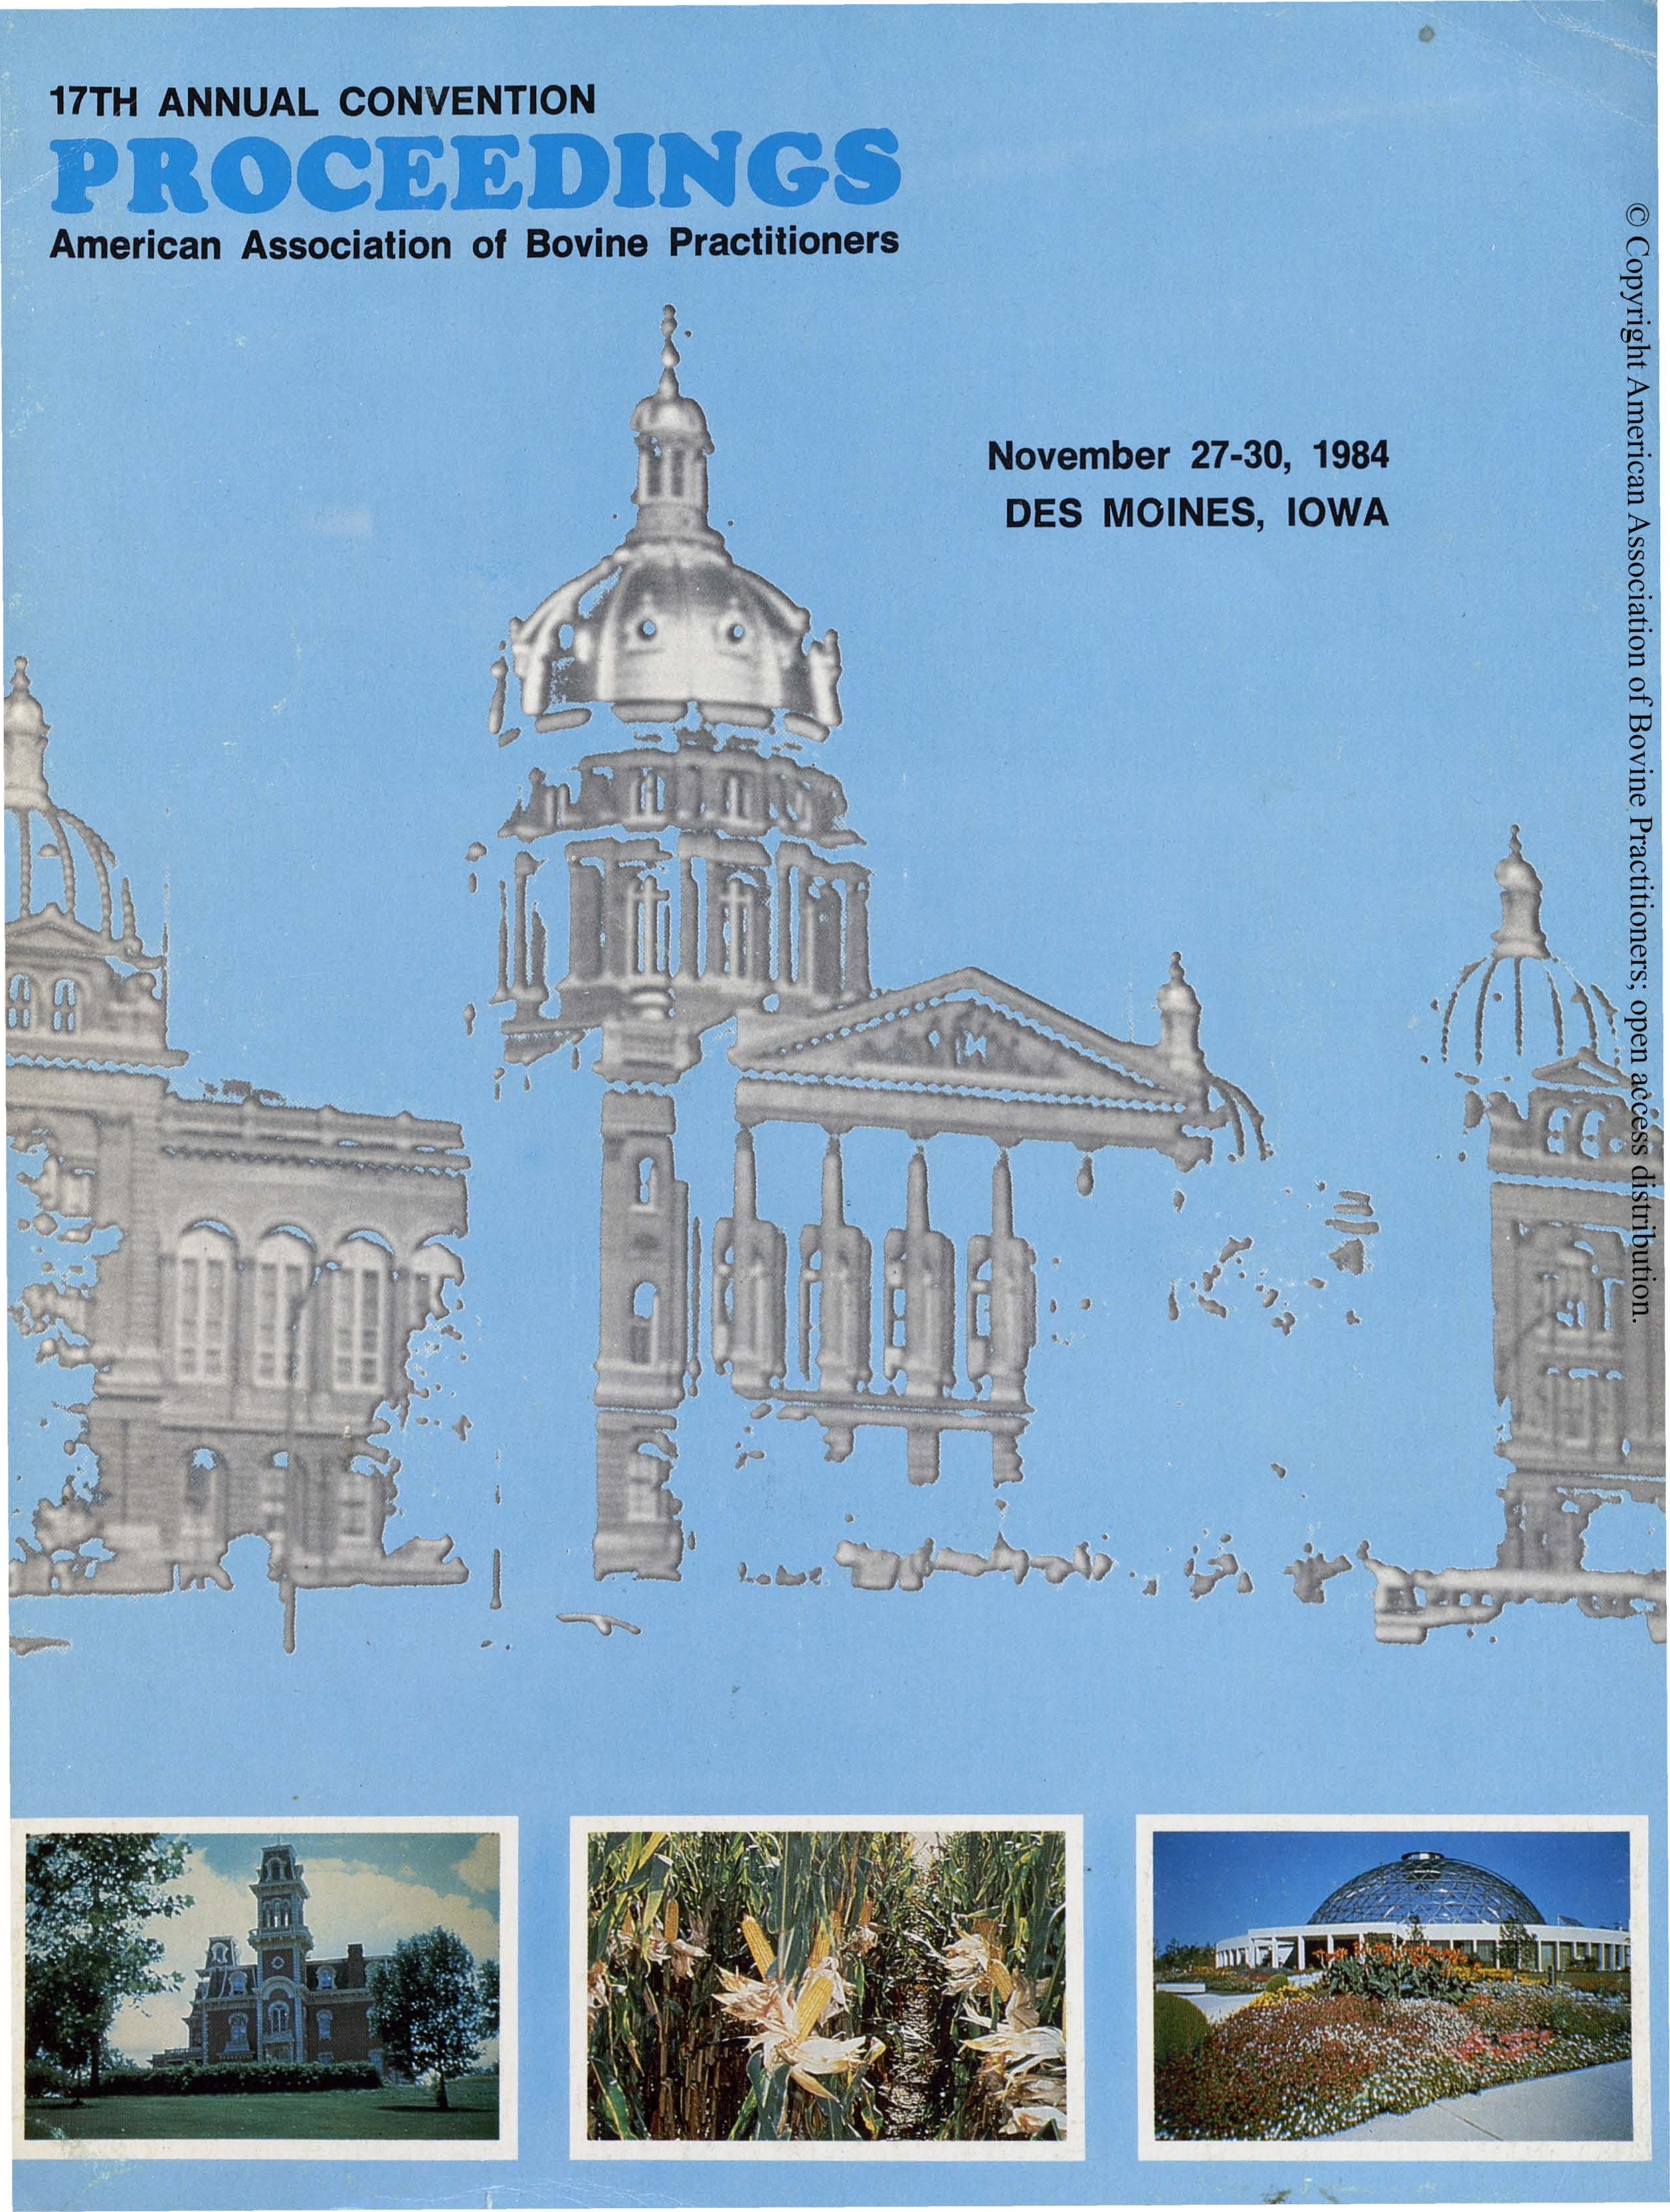 Cover image of the 17th Conference Proceedings: A photo of the Iowa State Capitol with a blue overlay that washes out most of the photo. On the bottom of the image are, from right to left, a picture of the Terrace Hill victorian home, a photo of corn, and a photo of the Des Moines Botanical Center.